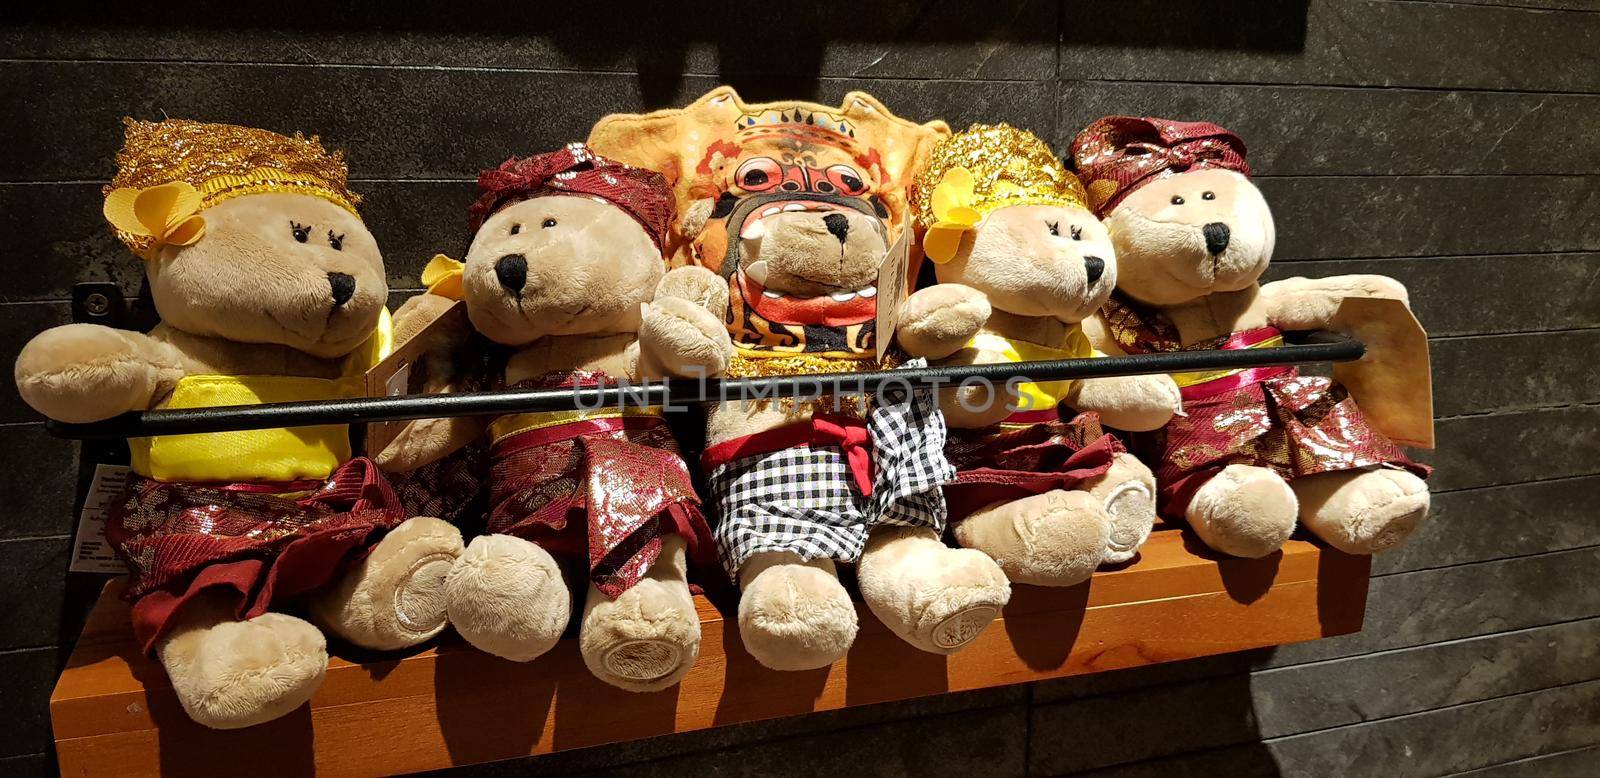 Group of Fluffy Stuffed Bear Toys Wearing various Clothes, teddy bear stuffed animal sitting in the wood bracket